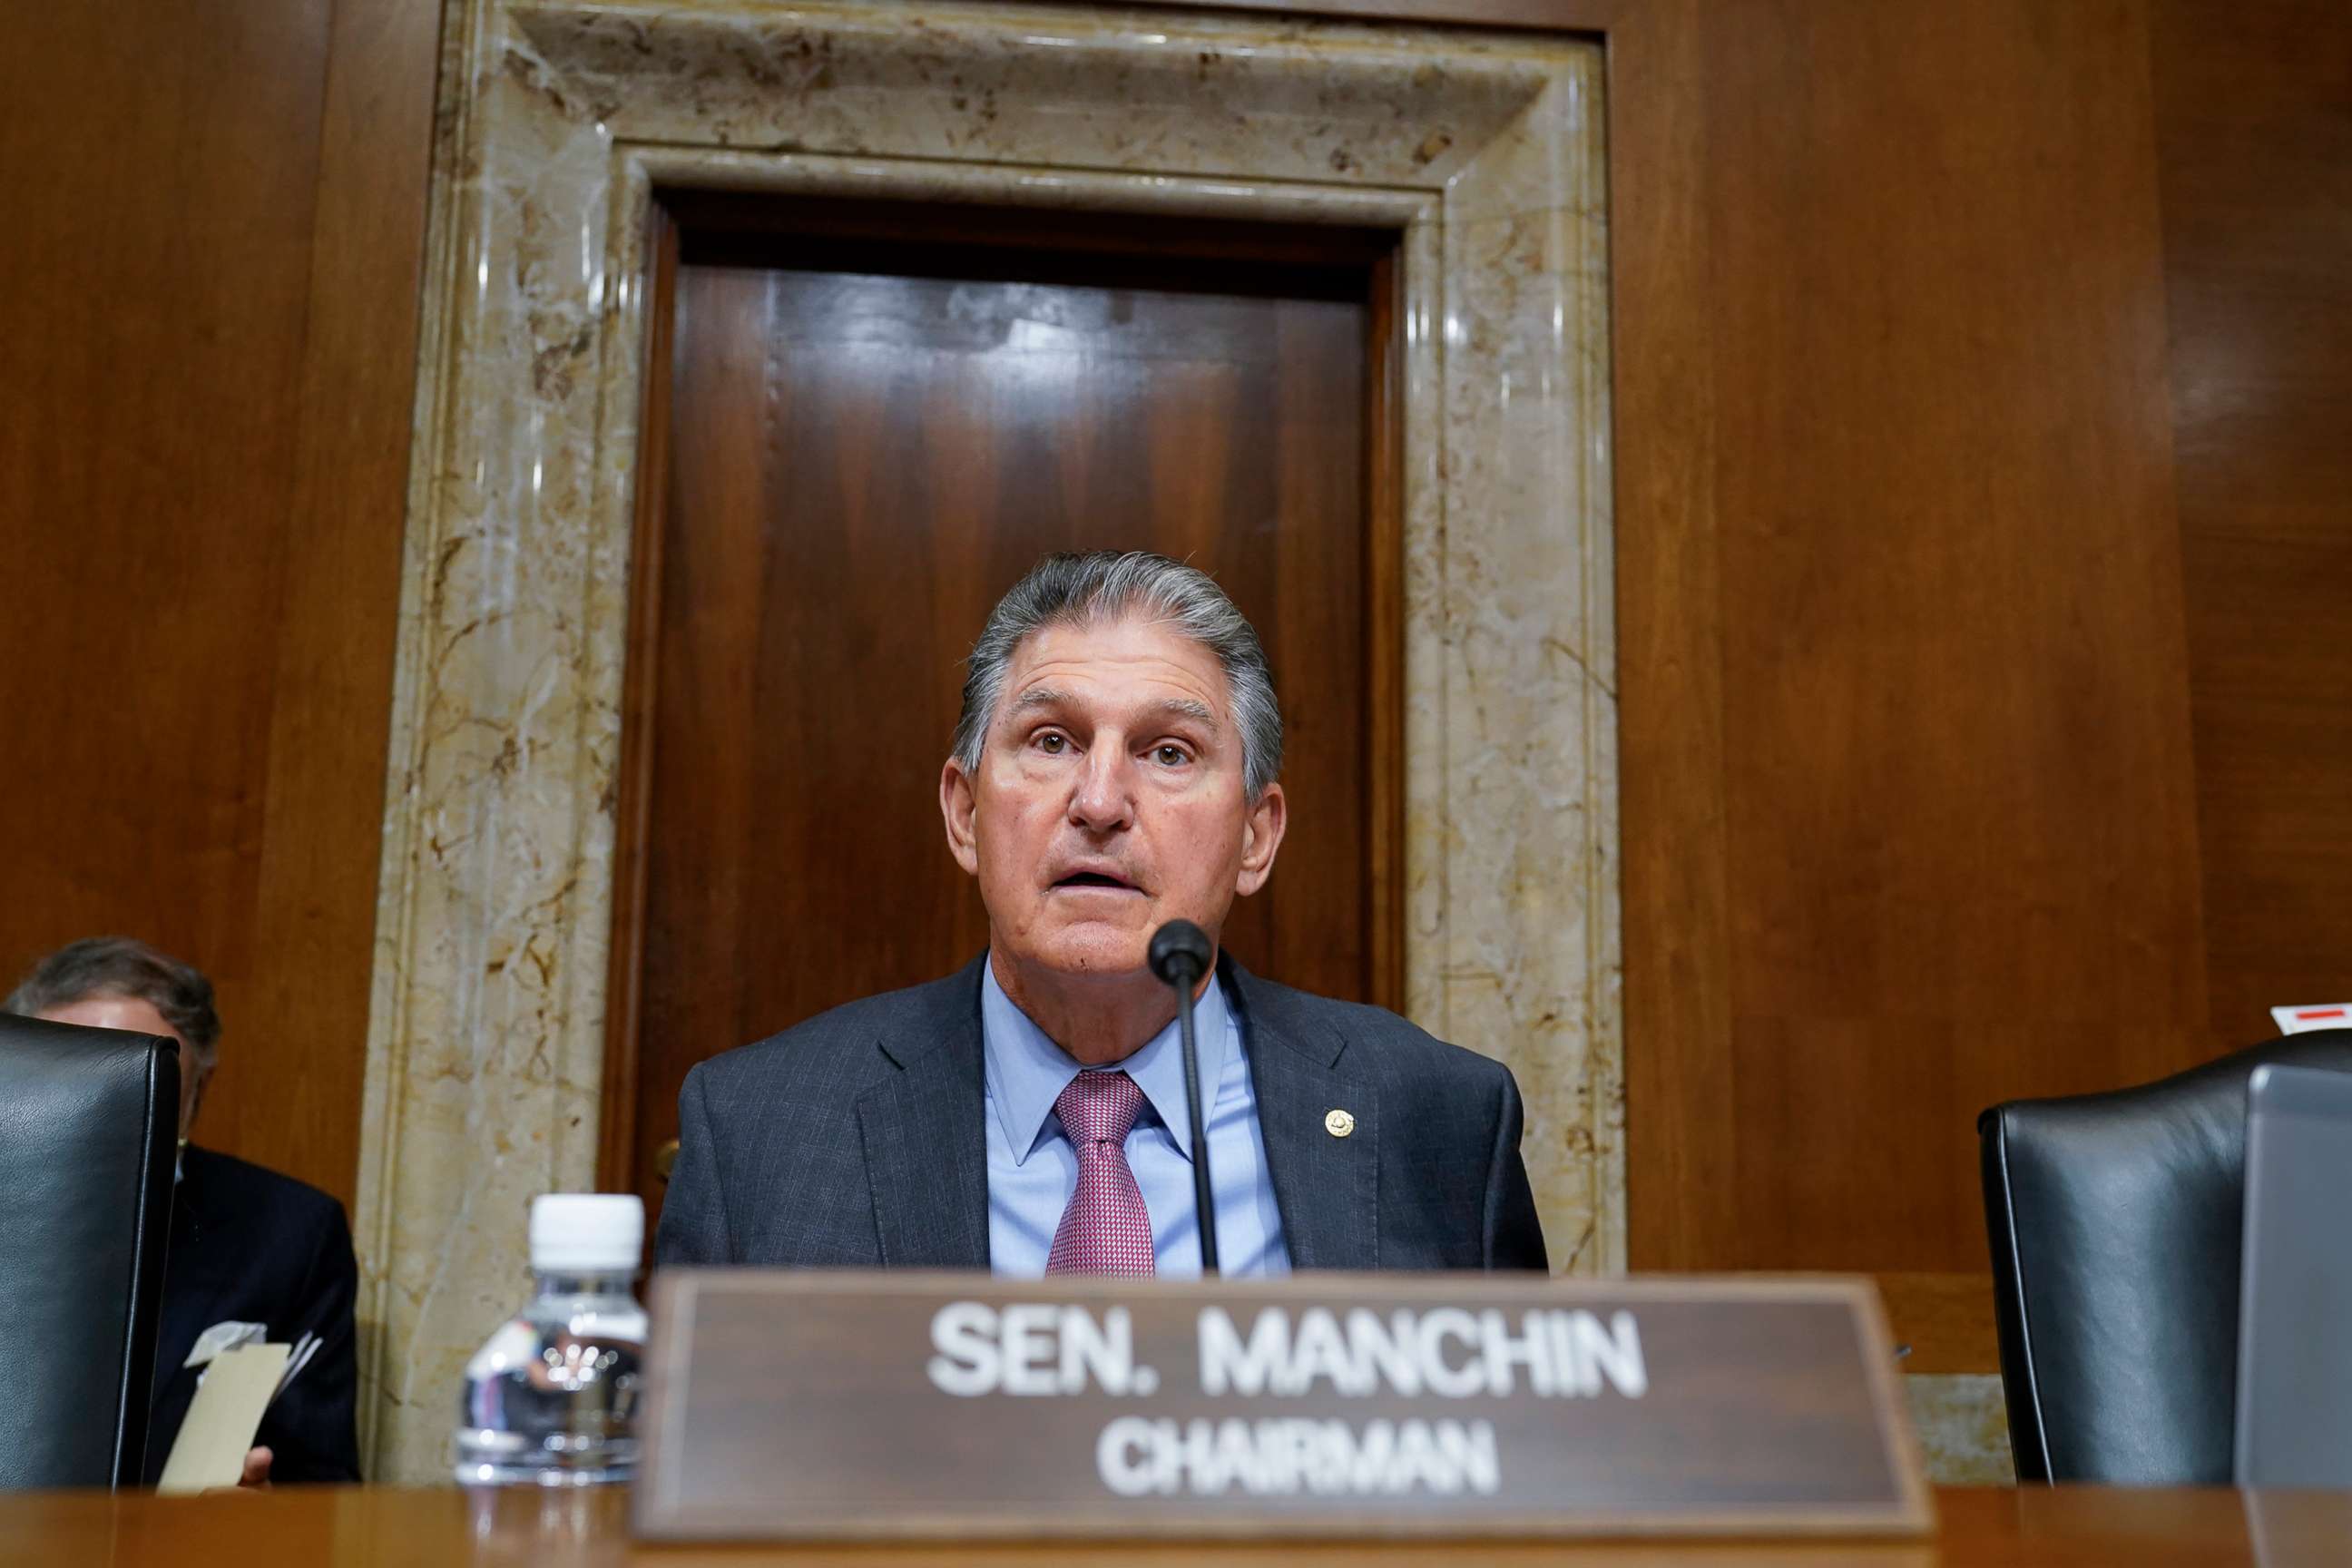 PHOTO: Sen. Joe Manchin arrives to chair the Senate Energy and Natural Resources Committee at the Capitol, Sept. 21, 2021.